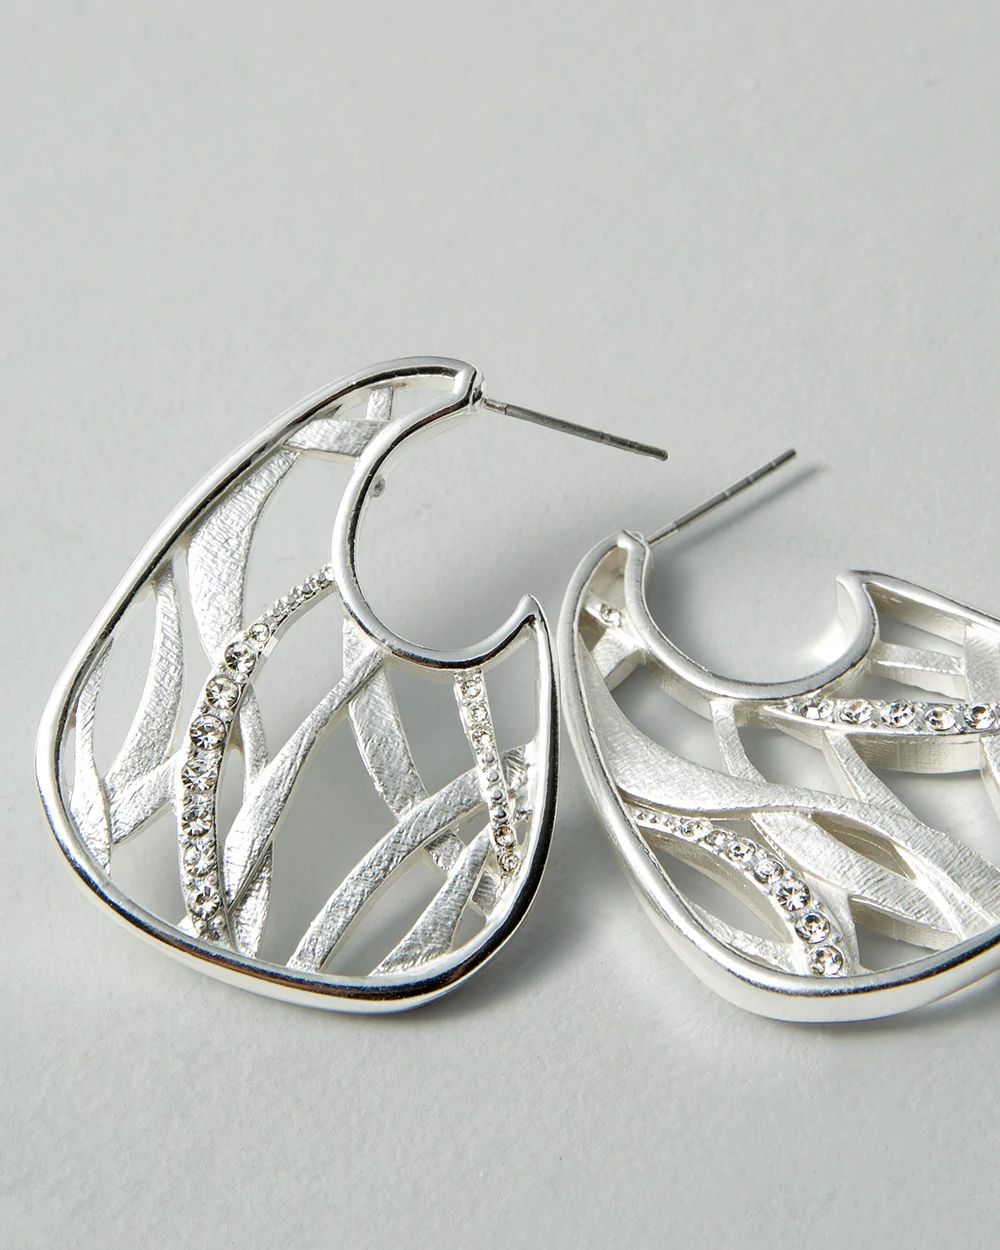 Silver Oval Hoop Earrings click to view larger image.